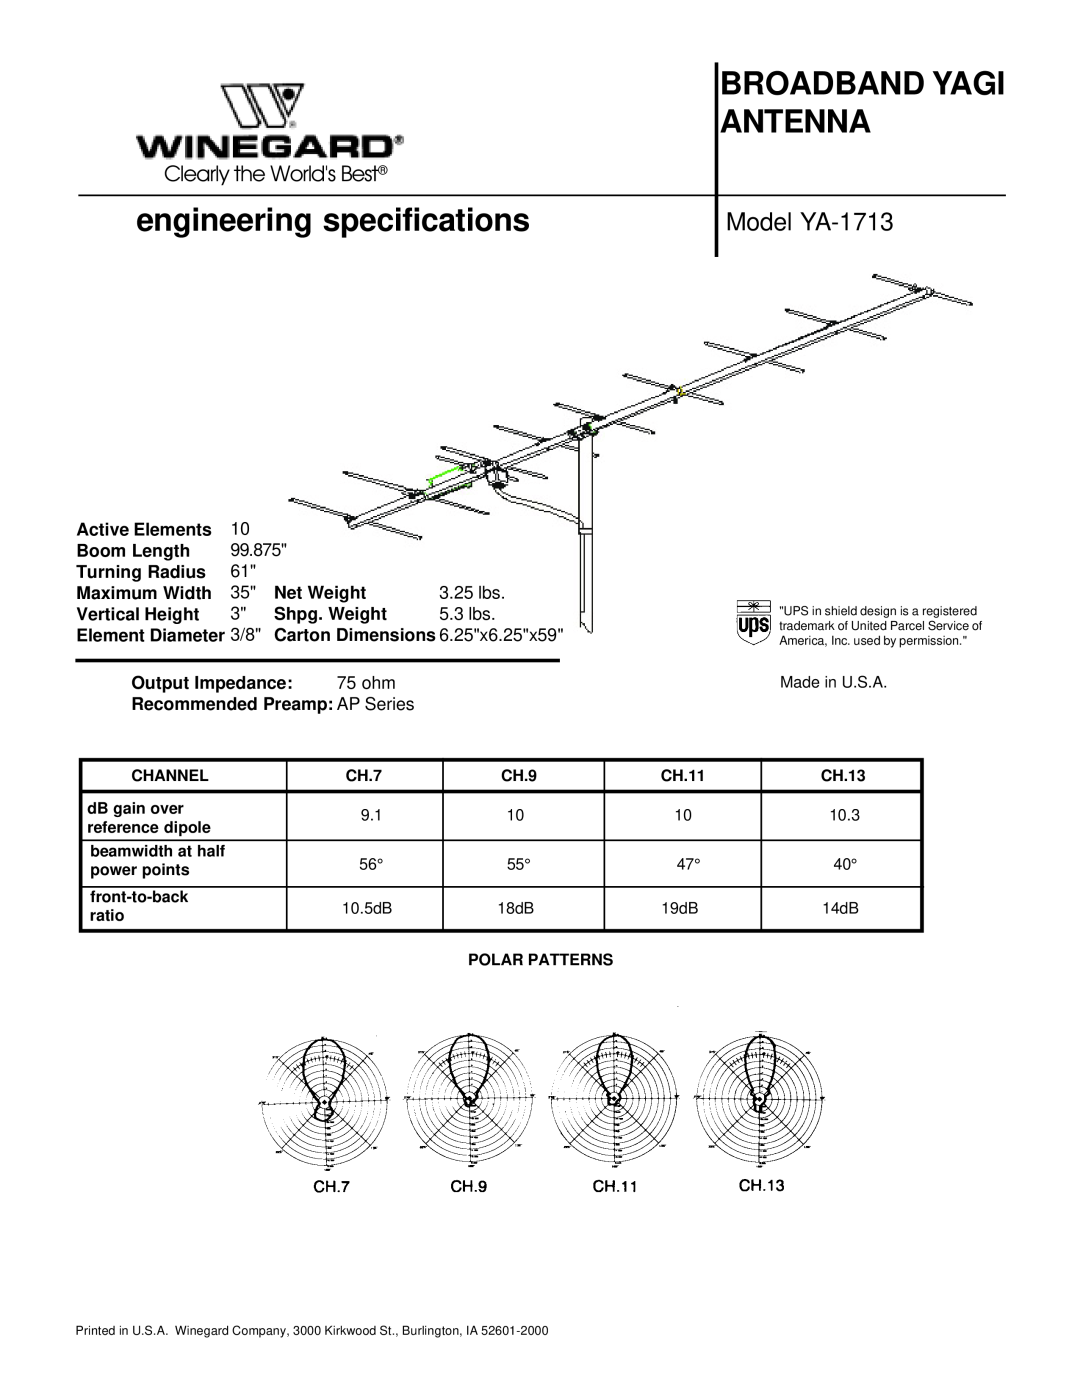 Winegard specifications Broadband Yagi Antenna, engineering specifications, Model YA-1713, Clearly the Worlds Best 